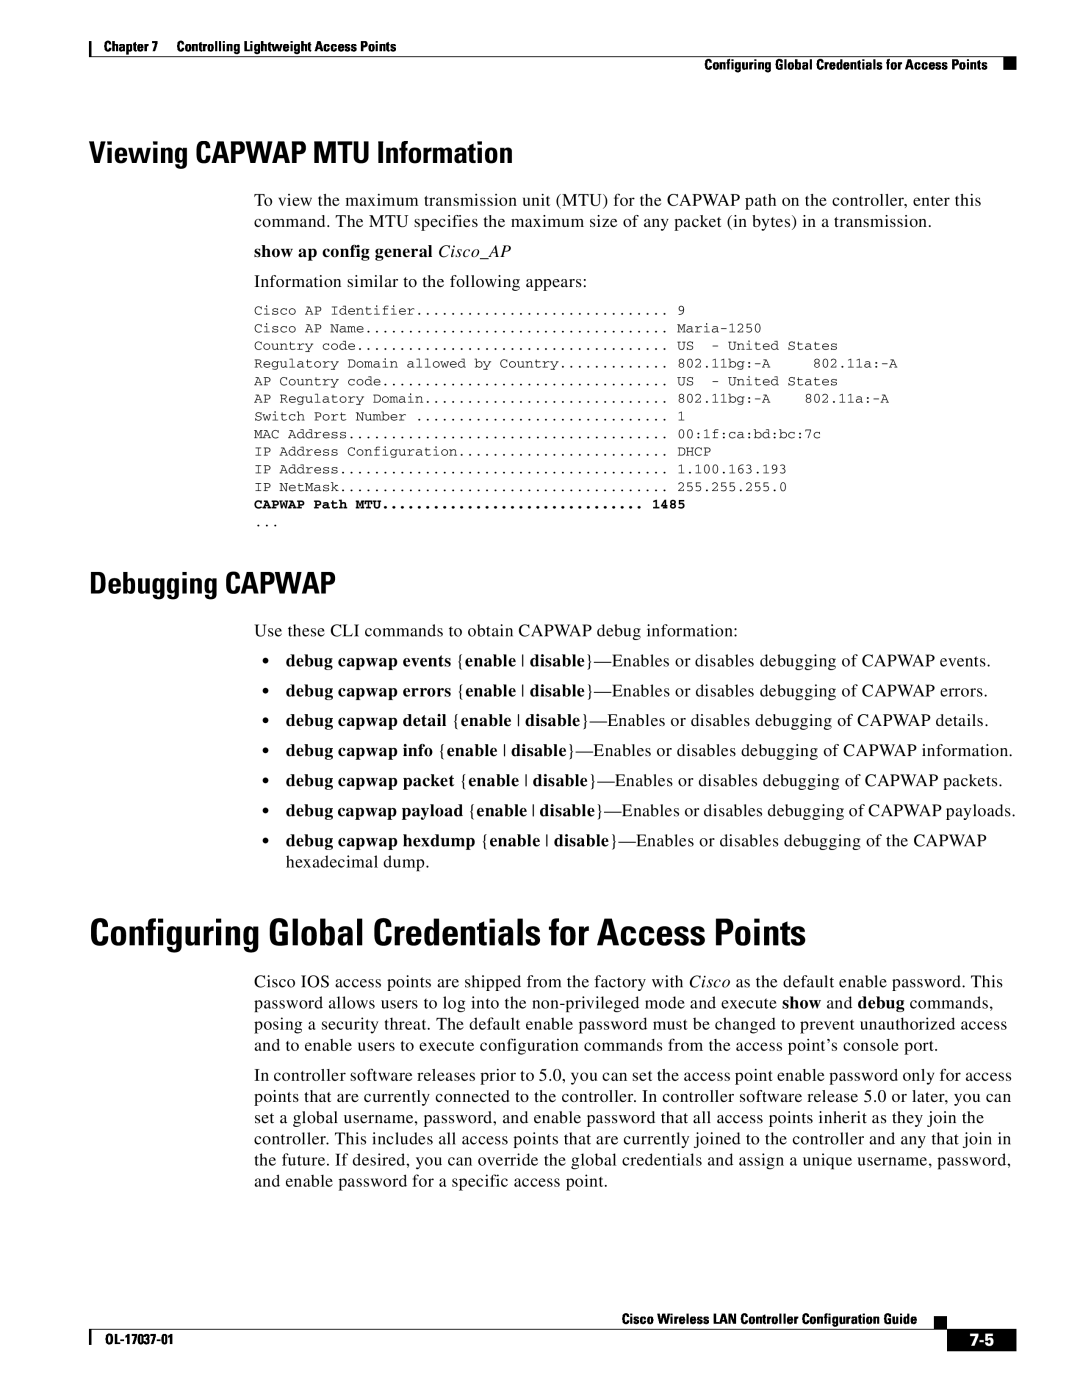 Cisco Systems OL-17037-01 manual Configuring Global Credentials for Access Points, Viewing CAPWAP MTU Information 